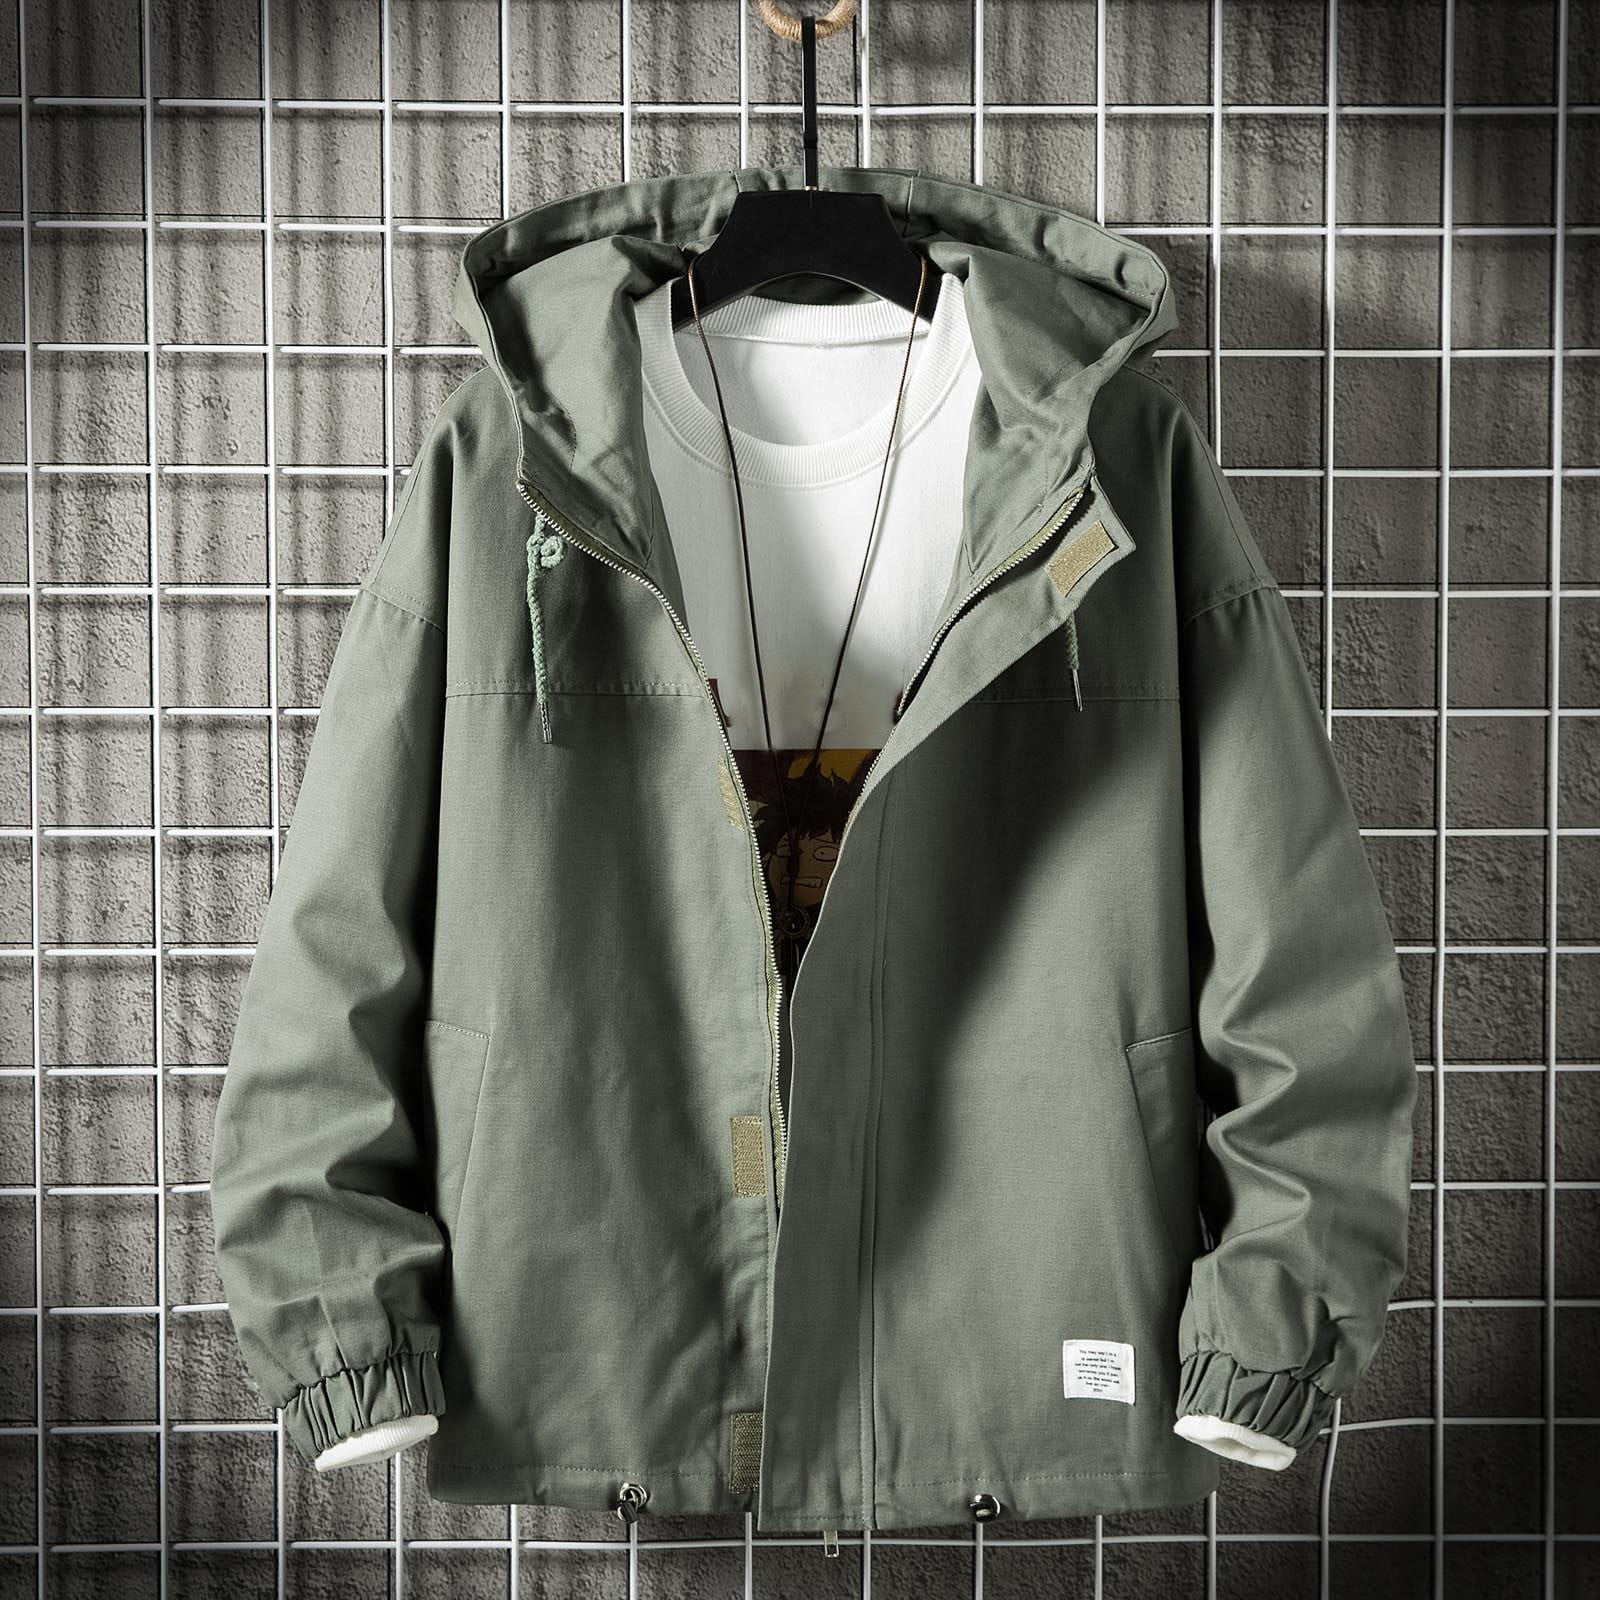 Fashion Mens Jackets Coat New Spring Autumn Men Casual Hooded Jacket  Windbreaker Outerwear Male Clothes Plus Size M 3XL From Hua356, $4.31